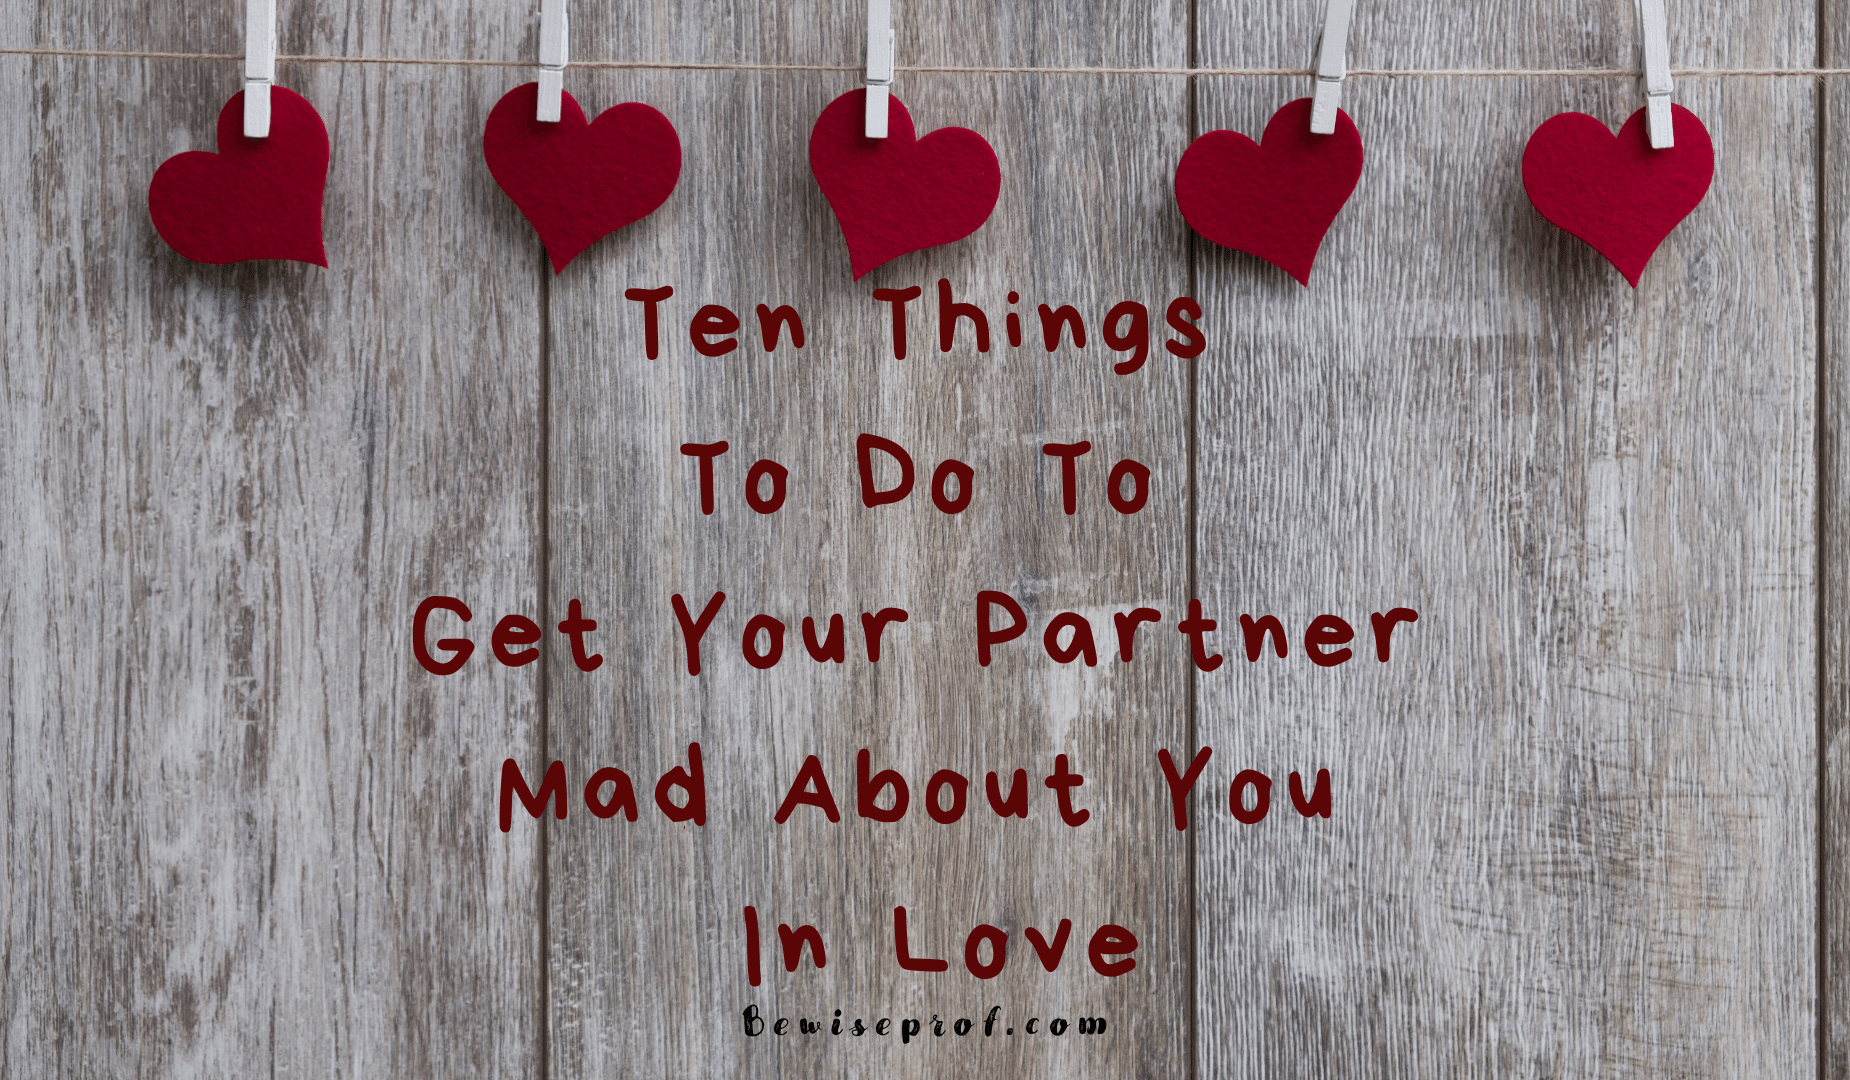 Ten Things To Do To Get Your Partner Mad About You In Love